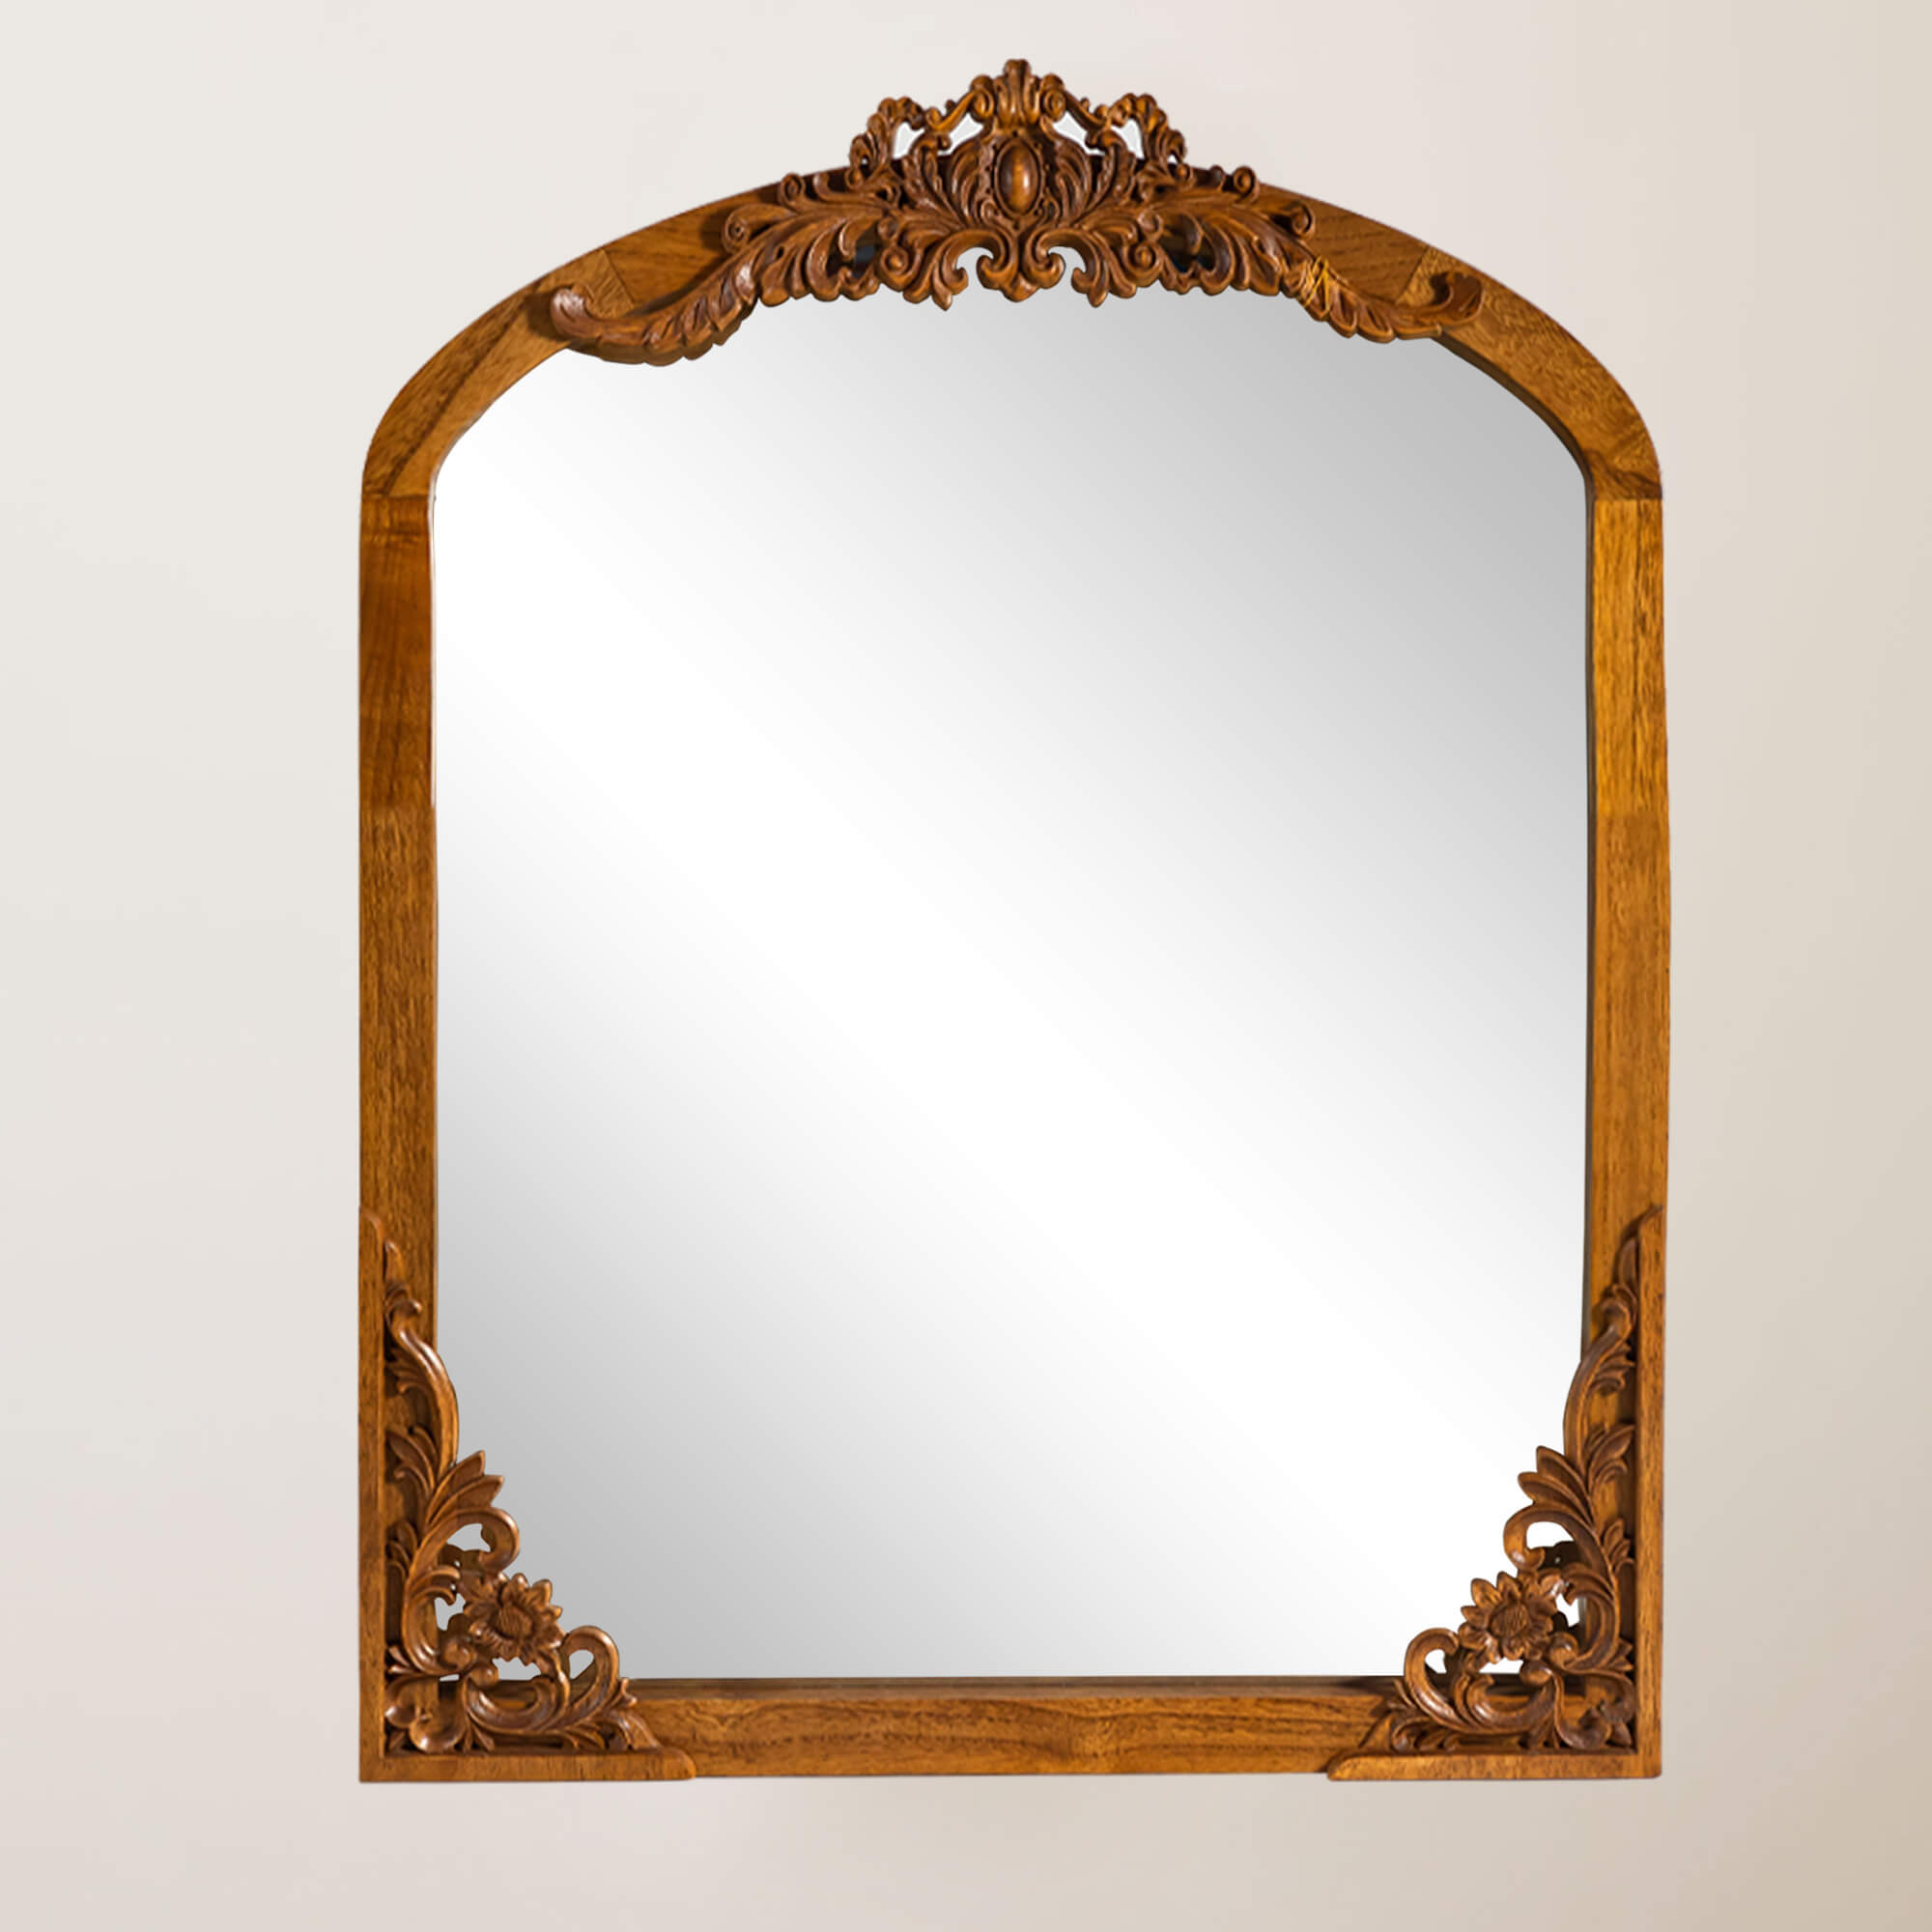 Janice- 39"x28" Rustic Solid Wood Carving Decor Wall Mirror